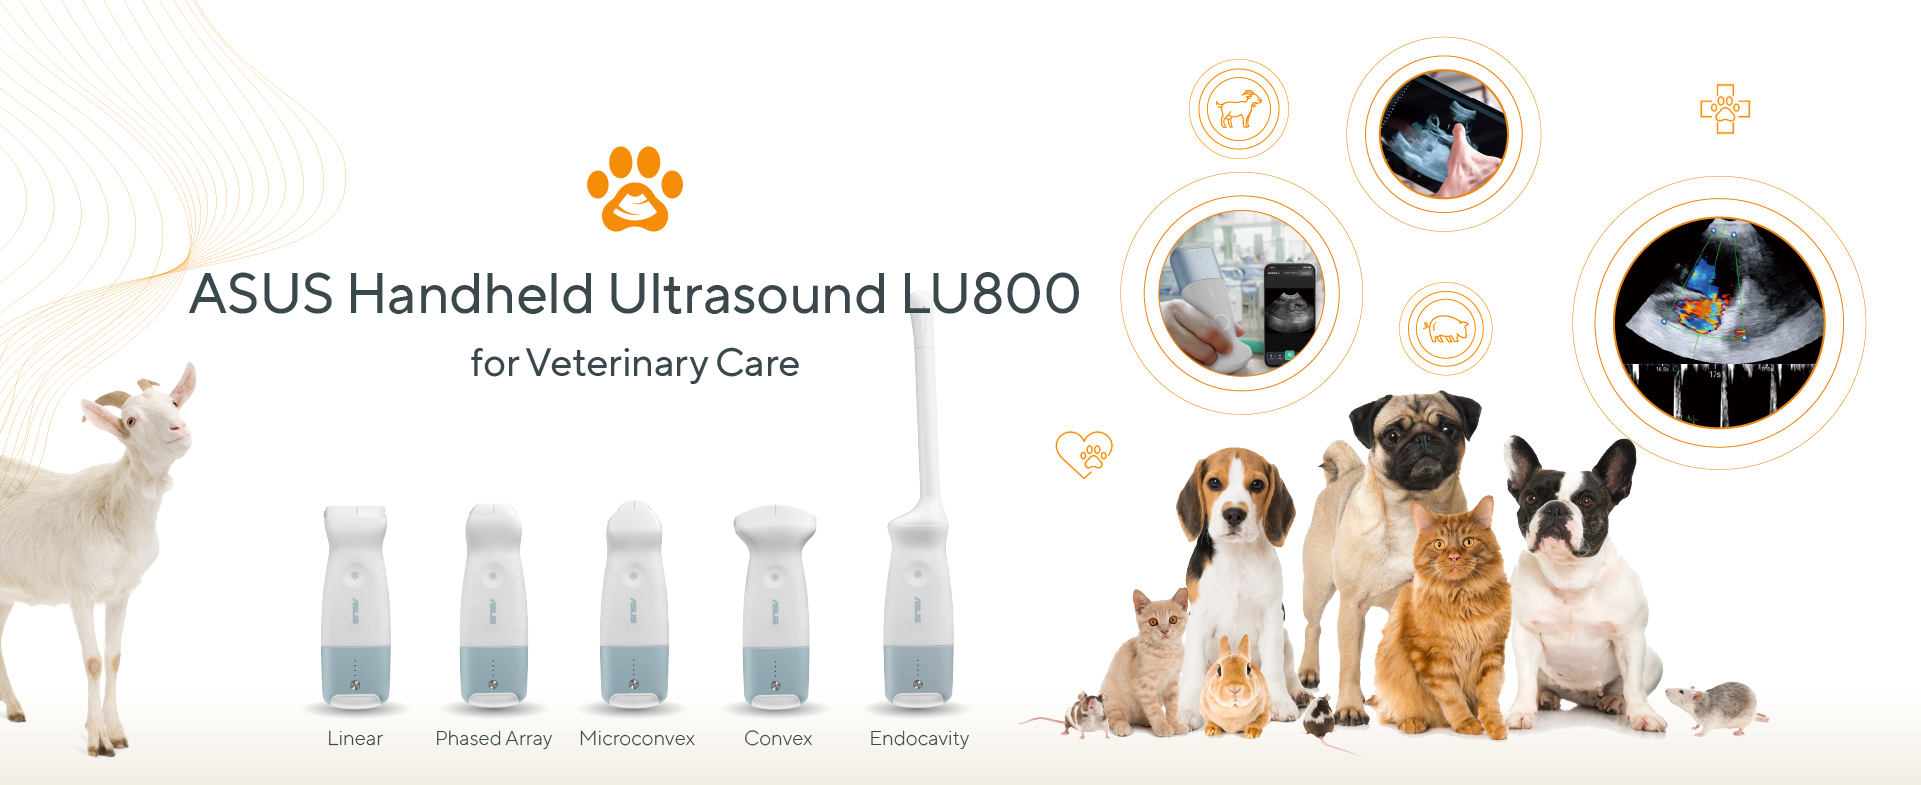 Pets, small animals, economic livestock, exotic pets, and various other animals can all benefit from its use, caring for their health and recommending the use of ASUS Handheld Ultrasound LU800 for livestocking care.